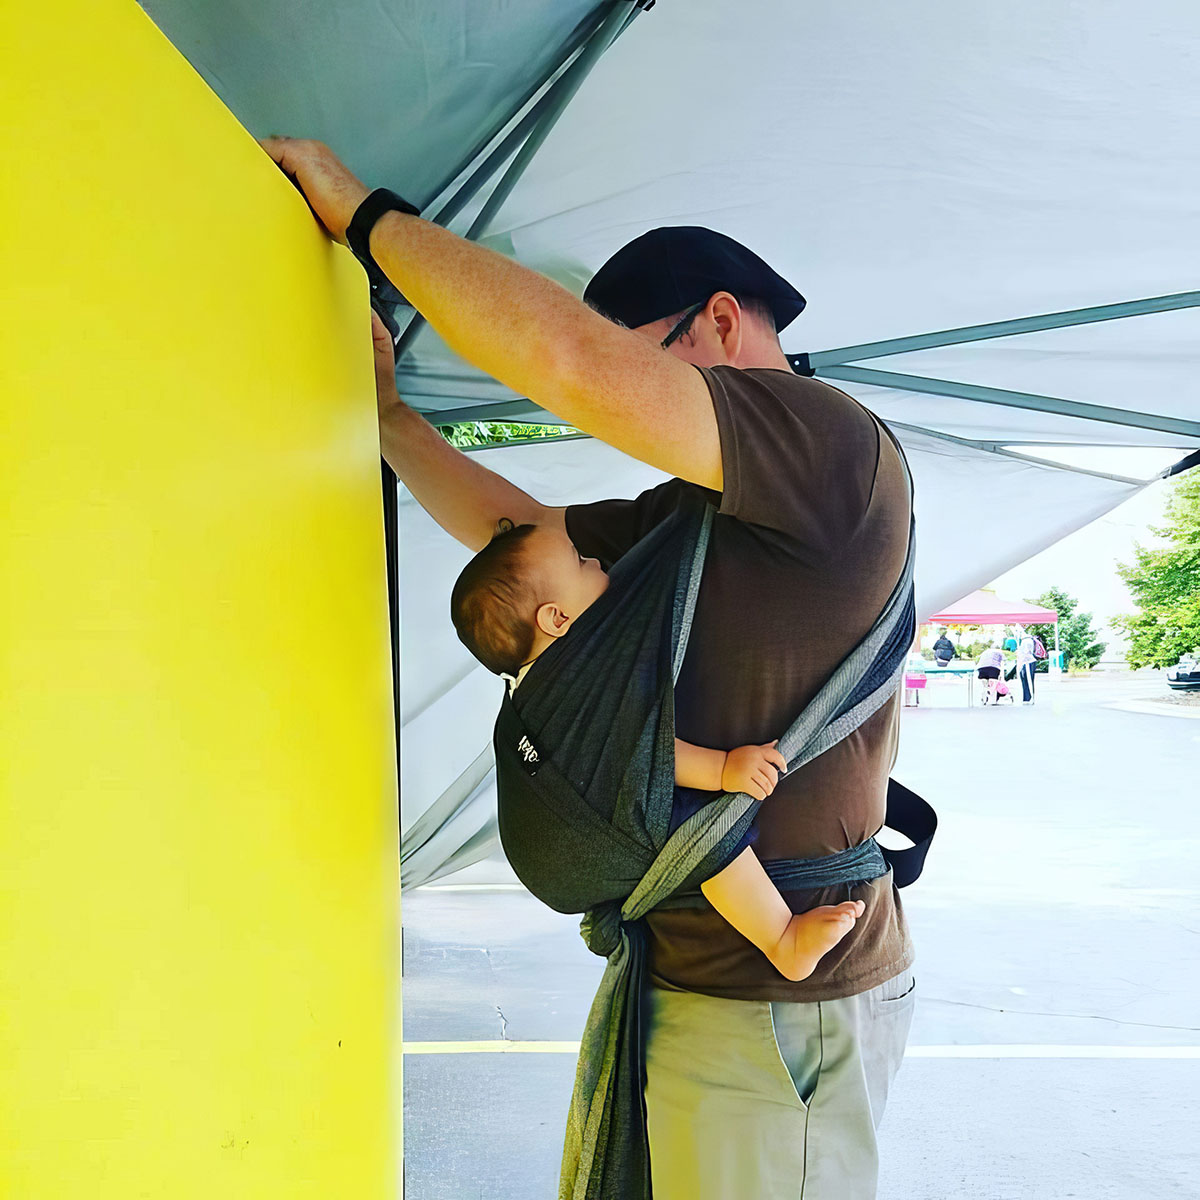 The image shows a man from behind as he stands under a canopy with a white ceiling and a bold yellow wall. He is wearing a brown t-shirt, khaki pants, and a dark cap, and is carrying a sleeping child in a grey baby sling. The child is dressed in black and appears to be resting comfortably against the man’s back. The man is reaching up towards the canopy, possibly adjusting or holding onto the structure. In the background, a festival or public event is hinted at with tents and people visible in the distance, suggesting a day out with the family.